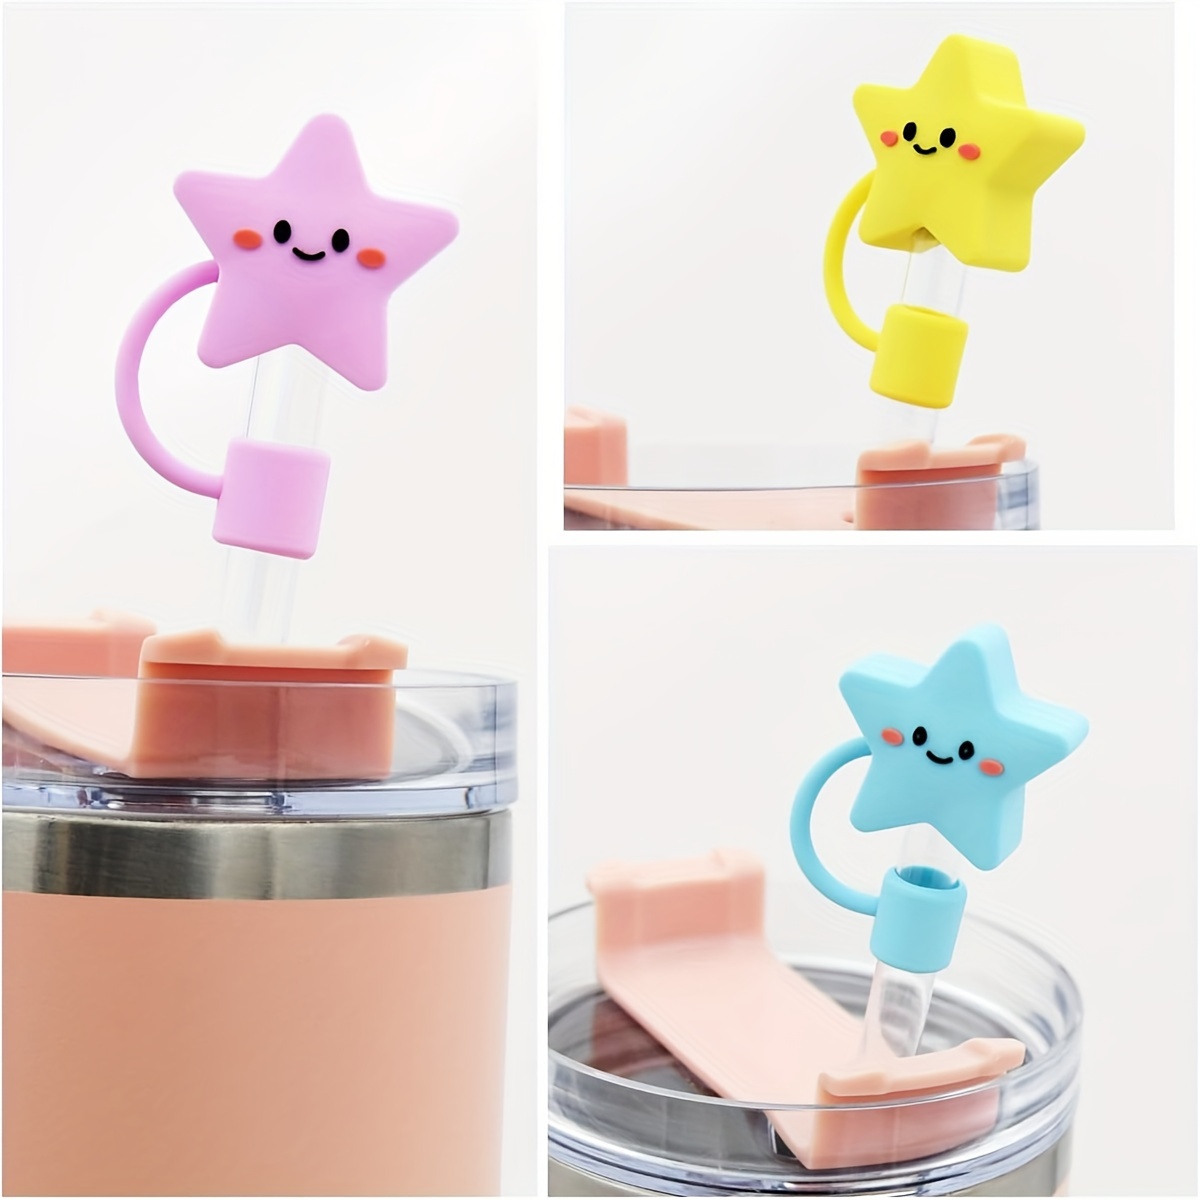 4pcs Cute Cartoon Star Shaped Straw Cover For 10mm Straw, Reusable  Leakproof Dustproof Straw Plugs, Cup Accessories